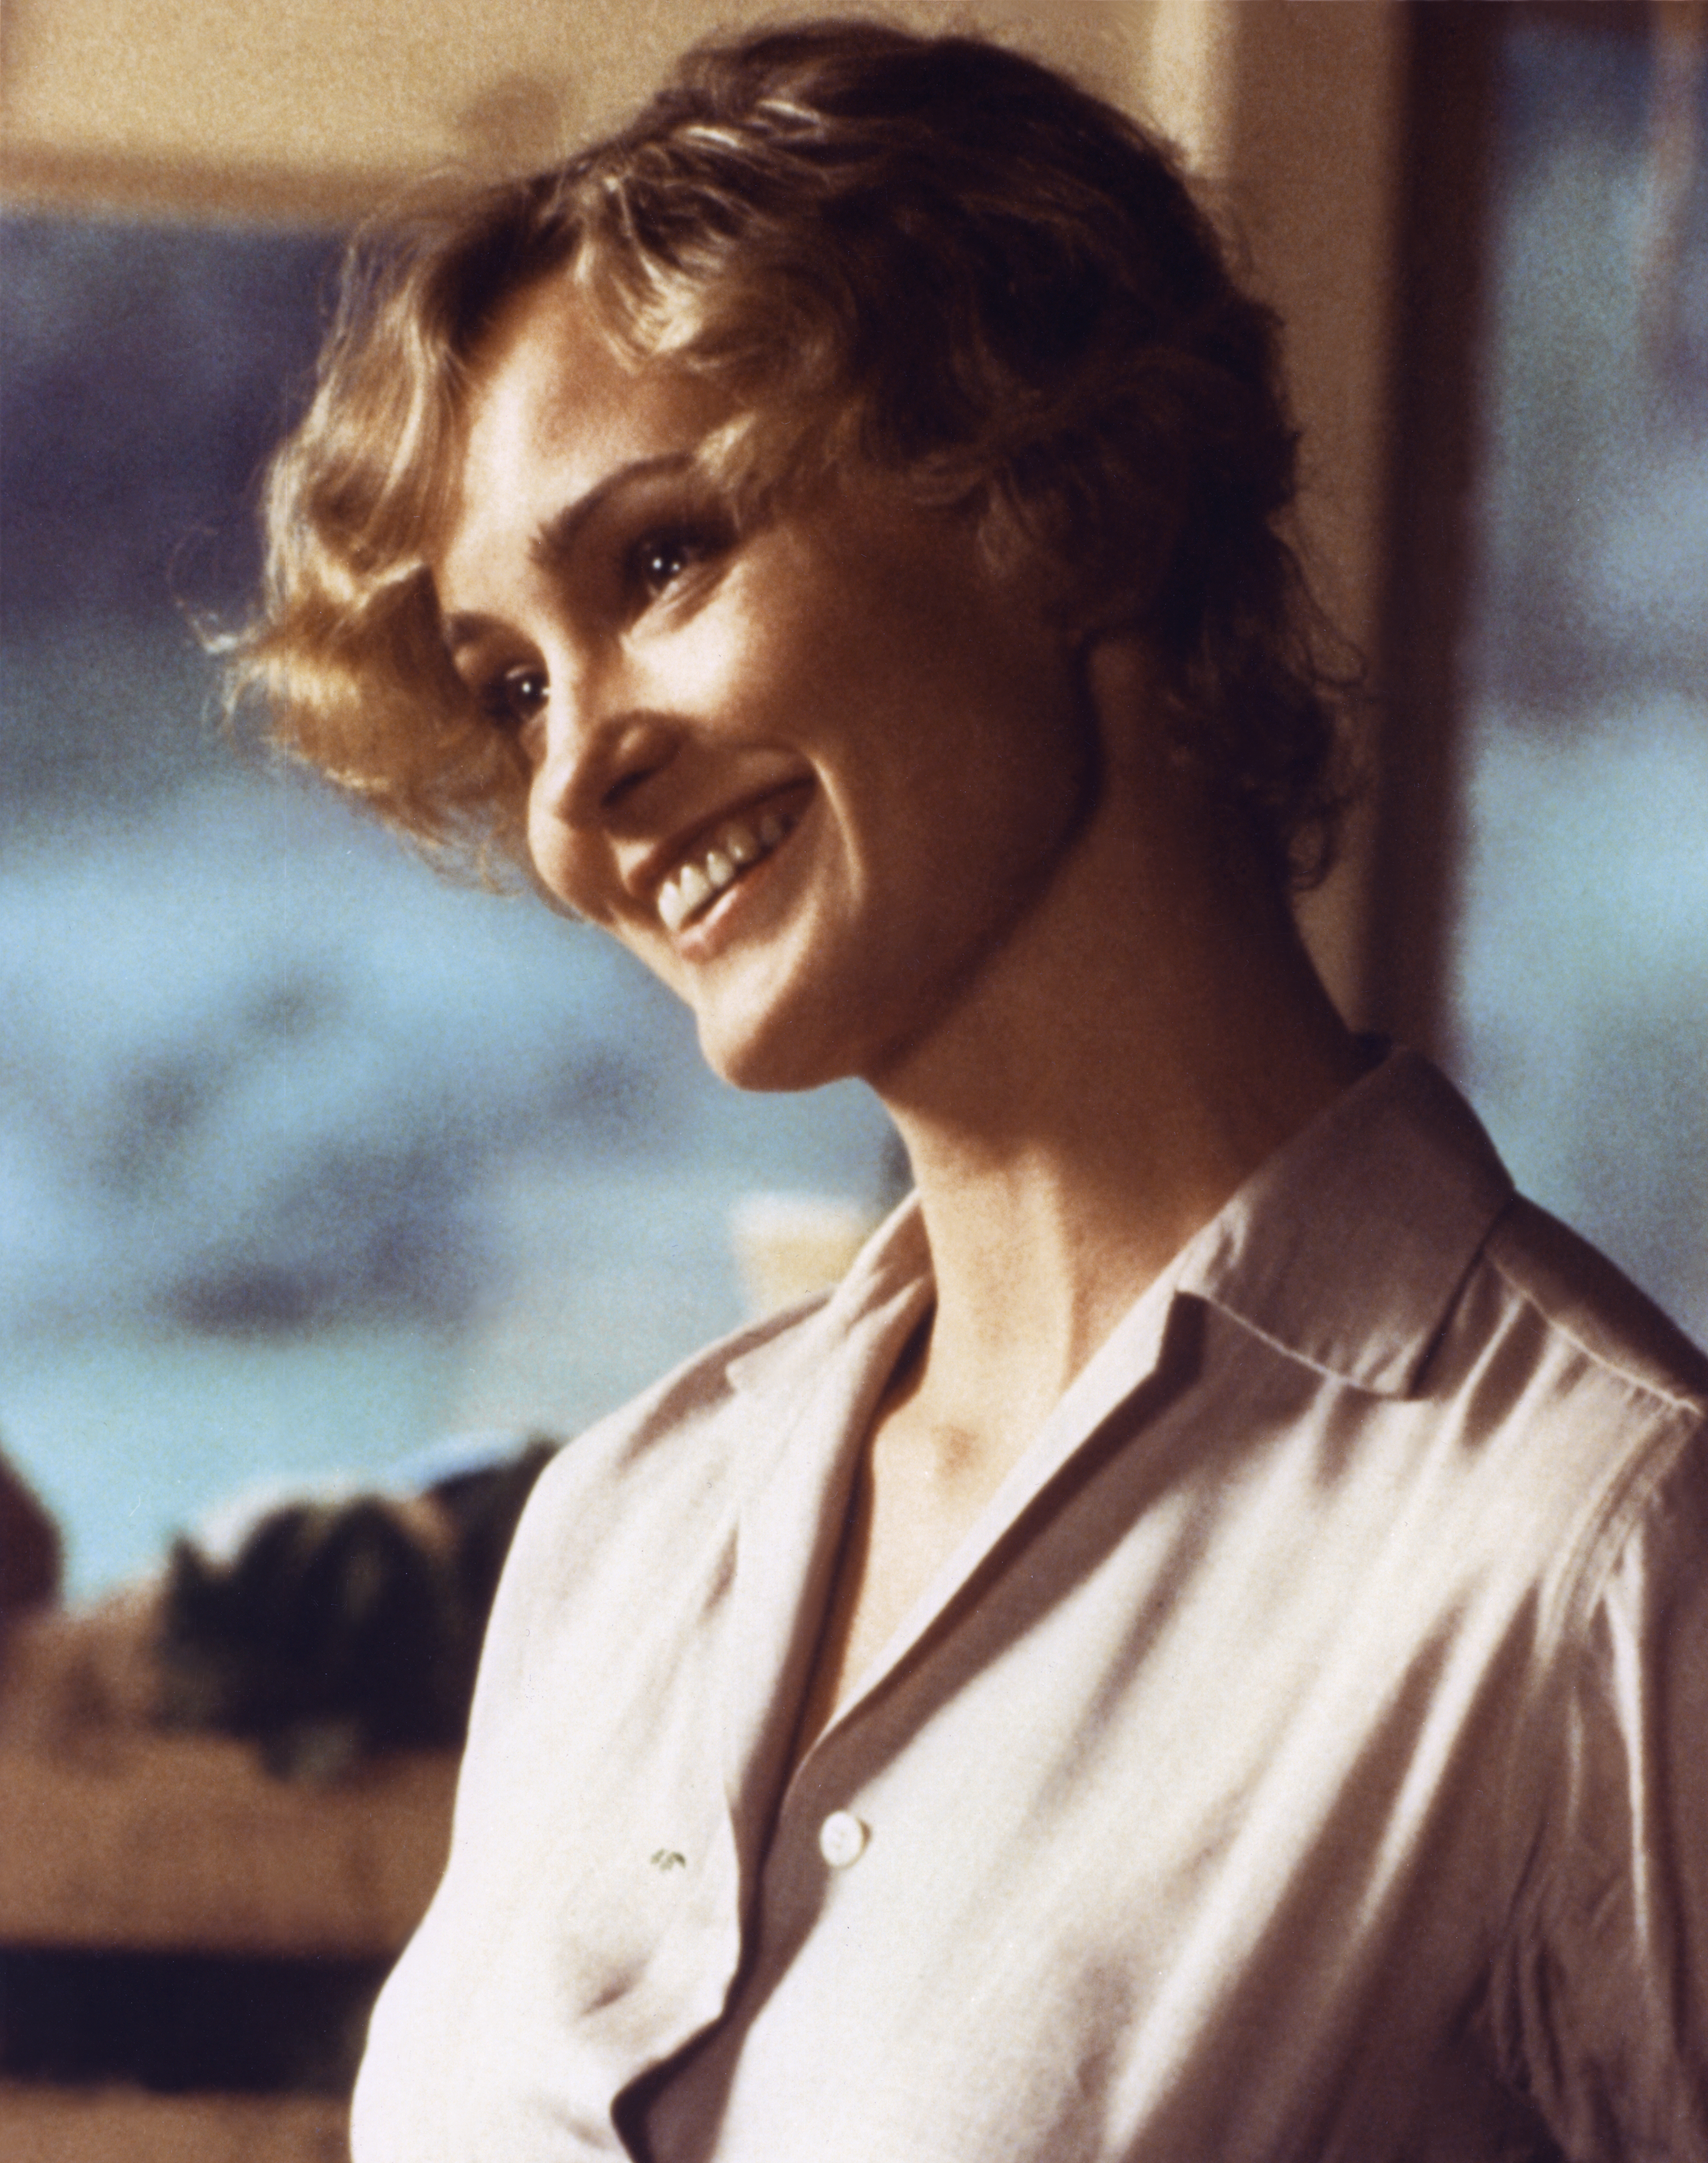 American actress Jessica Lange on the set of "The Postman Always Rings Twice" circa 1981. | Source: Getty Images